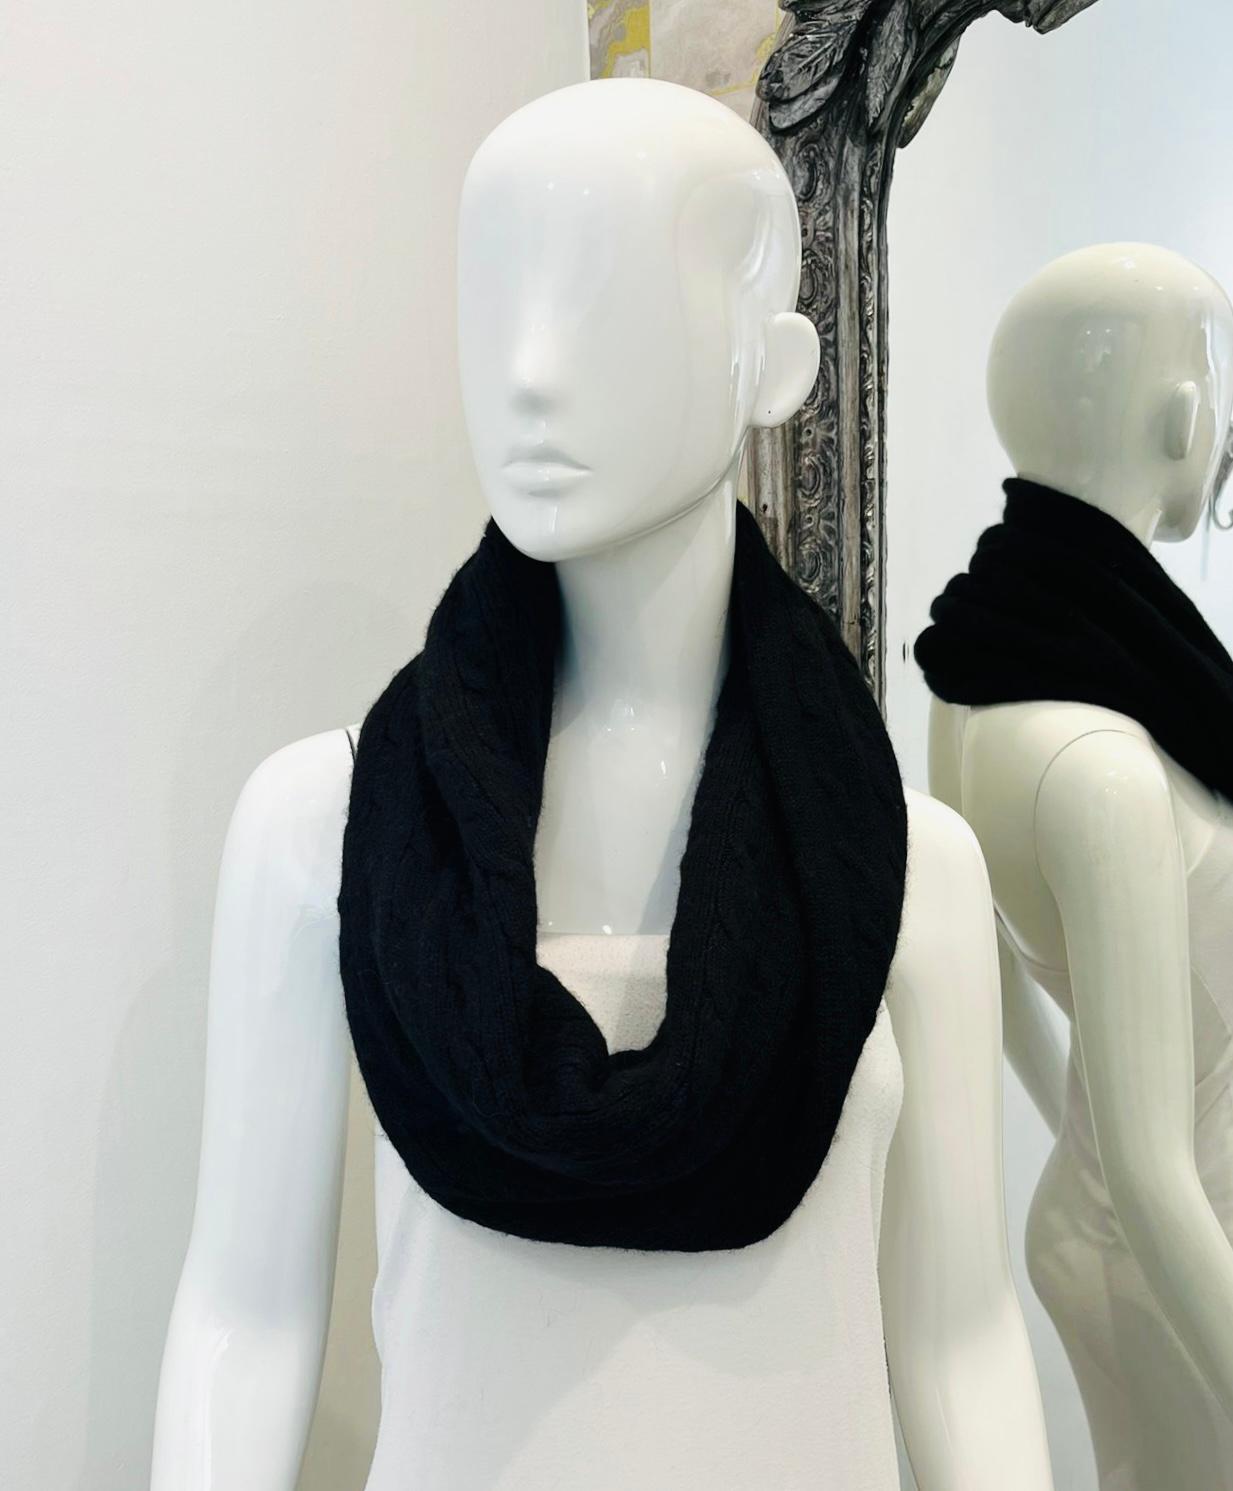 Ralph Lauren Cashmere, Alpaca & Wool Snood

Black snood detailed with subtle cable knit design.

Featuring soft and smooth texture, can be worn in various ways.

Size – One Size

Condition – Very Good

Composition – 58% Wool, 16& Alpaca, 13%